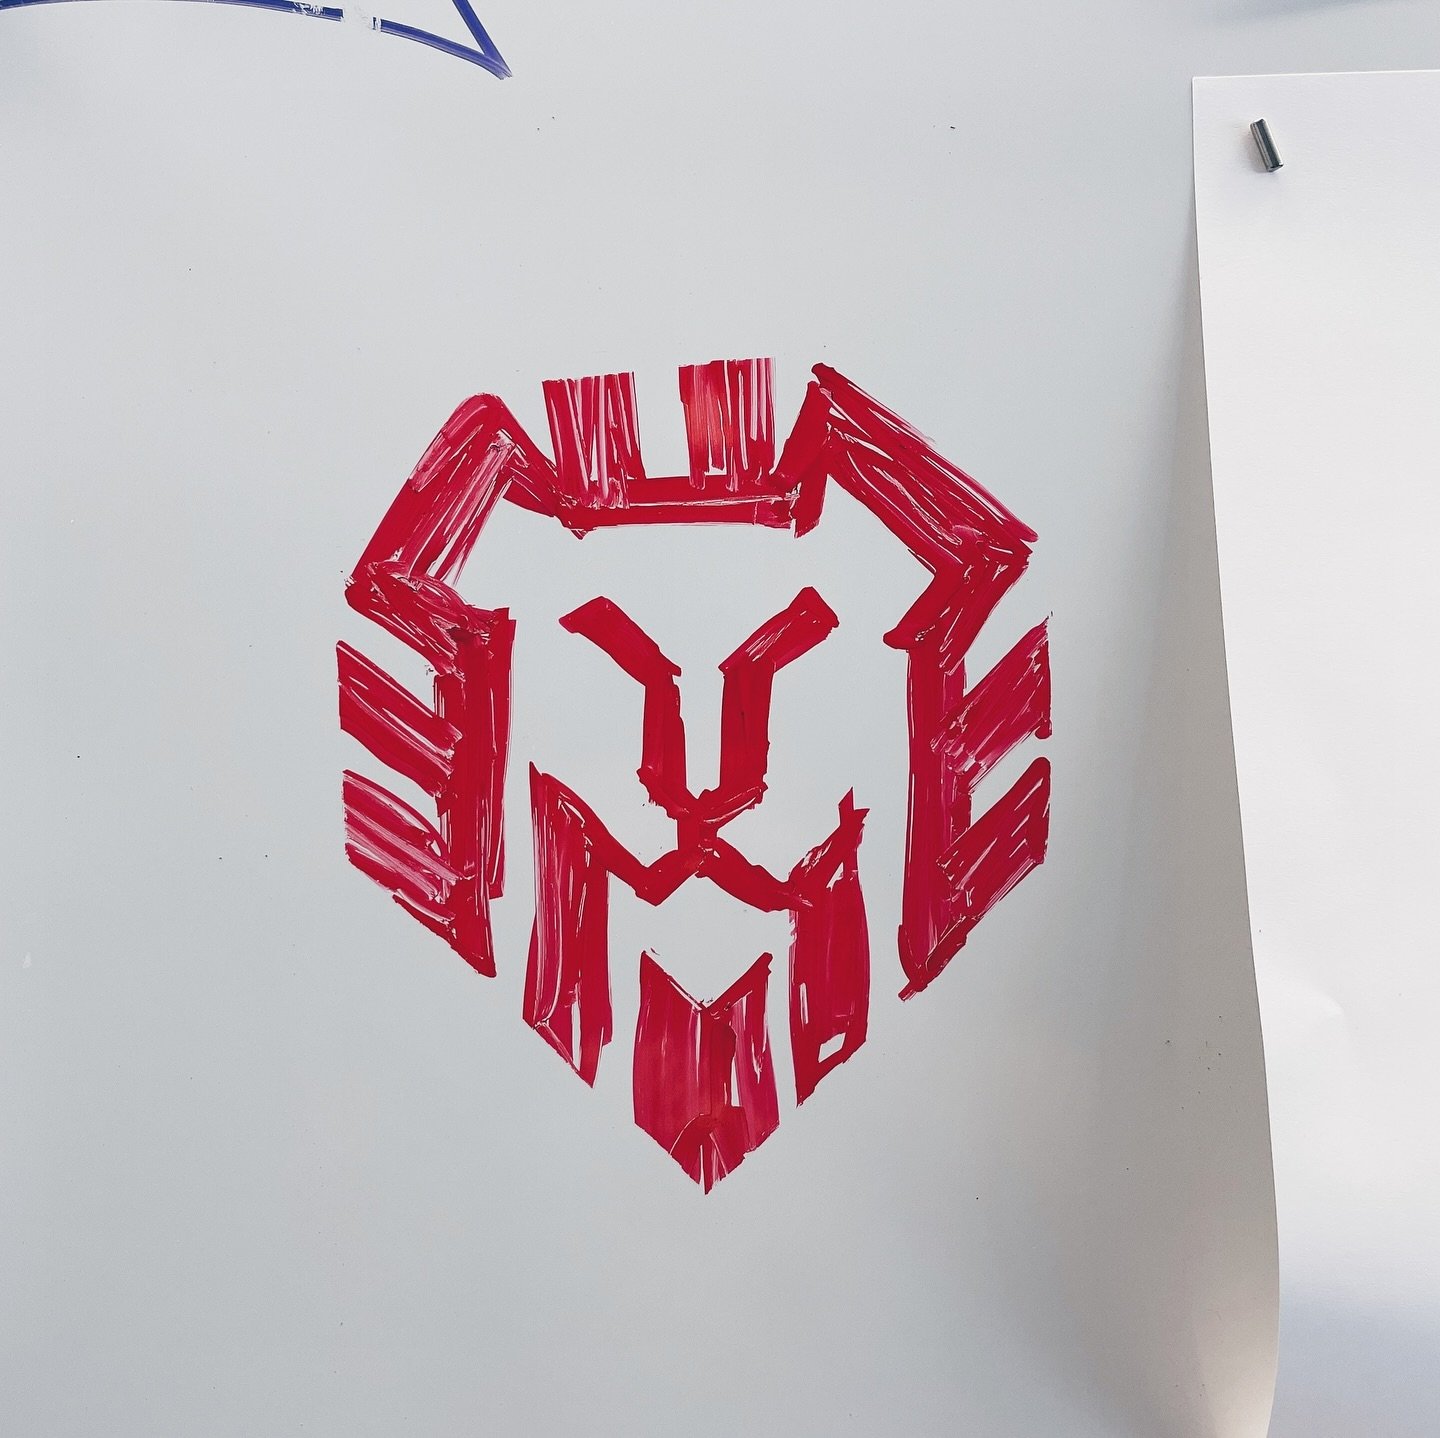 had no time to grab paper and pencil, so I fired up this sketch on the whiteboard in the middle of our class logo design critique. i wanted to show the students that simplifying a logo can make it more impactful and interesting. 🦁 

#OGDC #OGDesignC